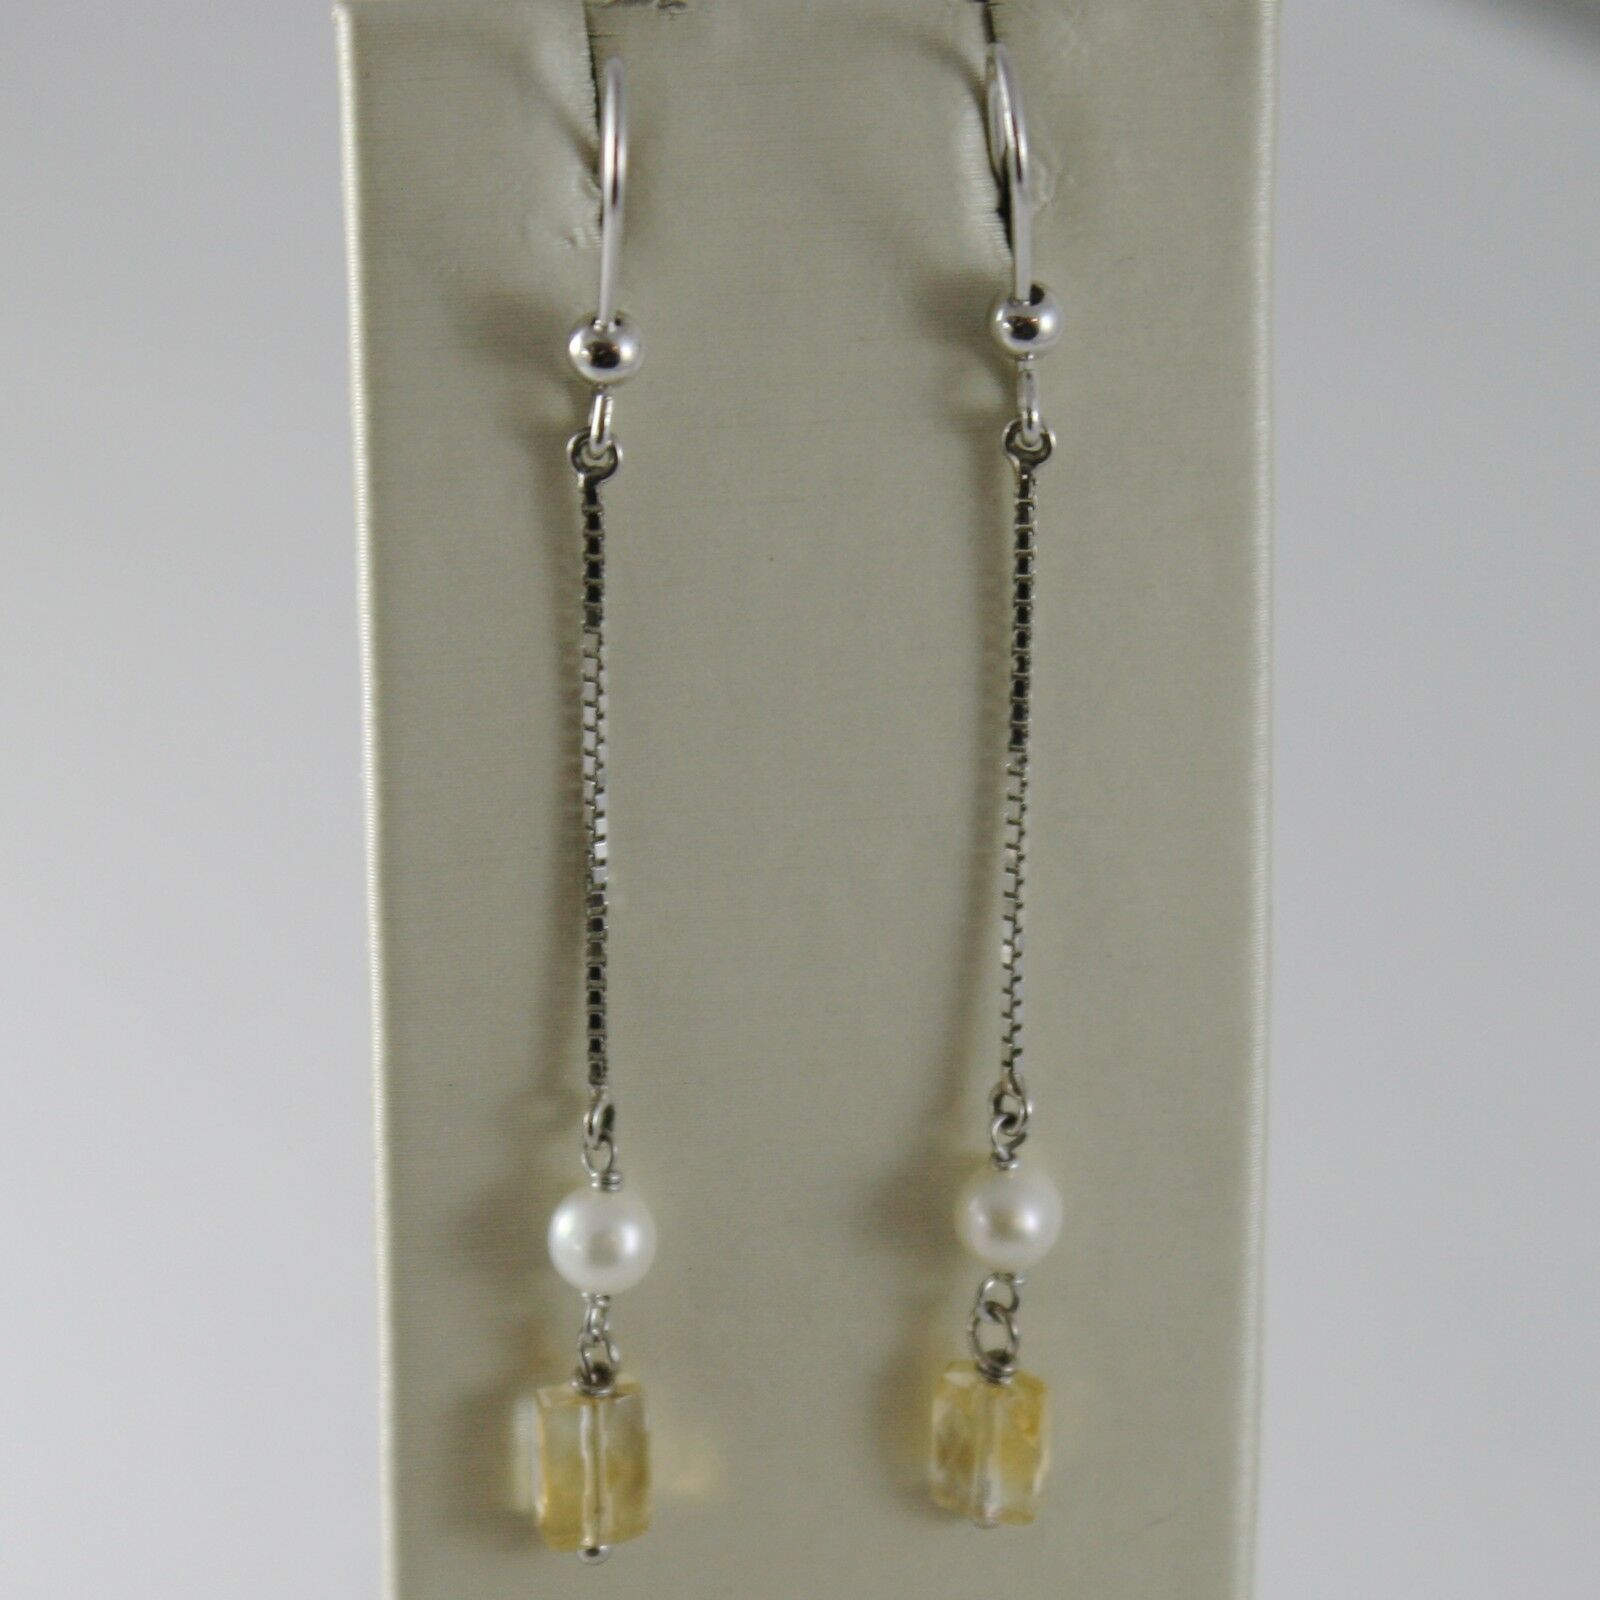 Primary image for SOLID 18K WHITE GOLD PENDANT EARRINGS WITH CITRINE AND PEARL MADE IN ITALY